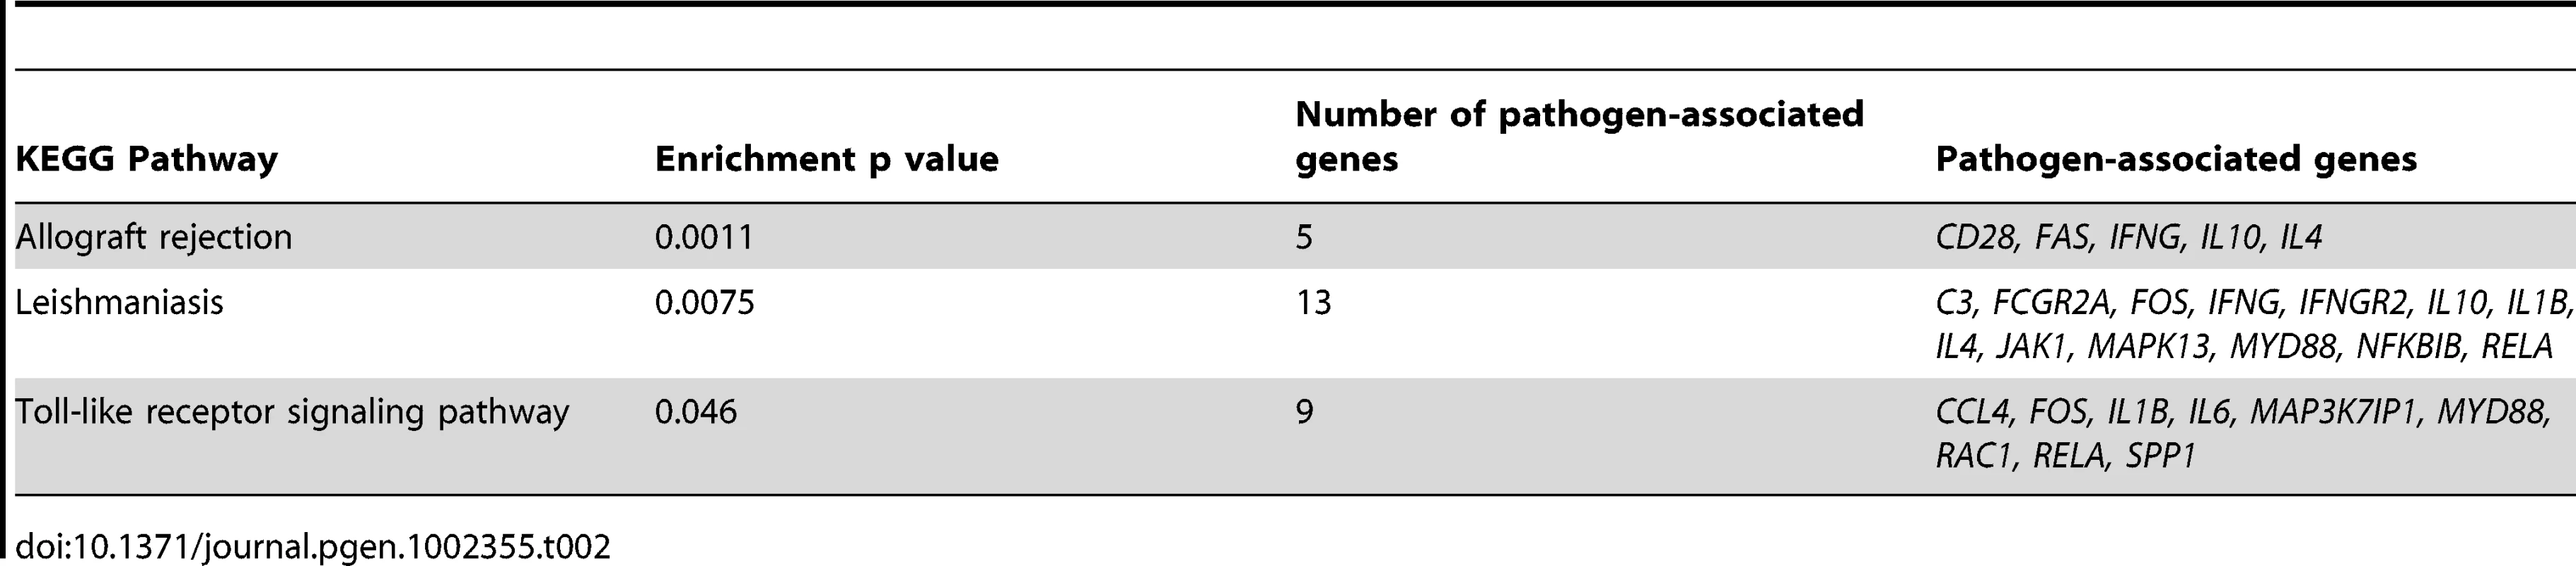 pathways enriched with genes which correlated with pathogen diversity.